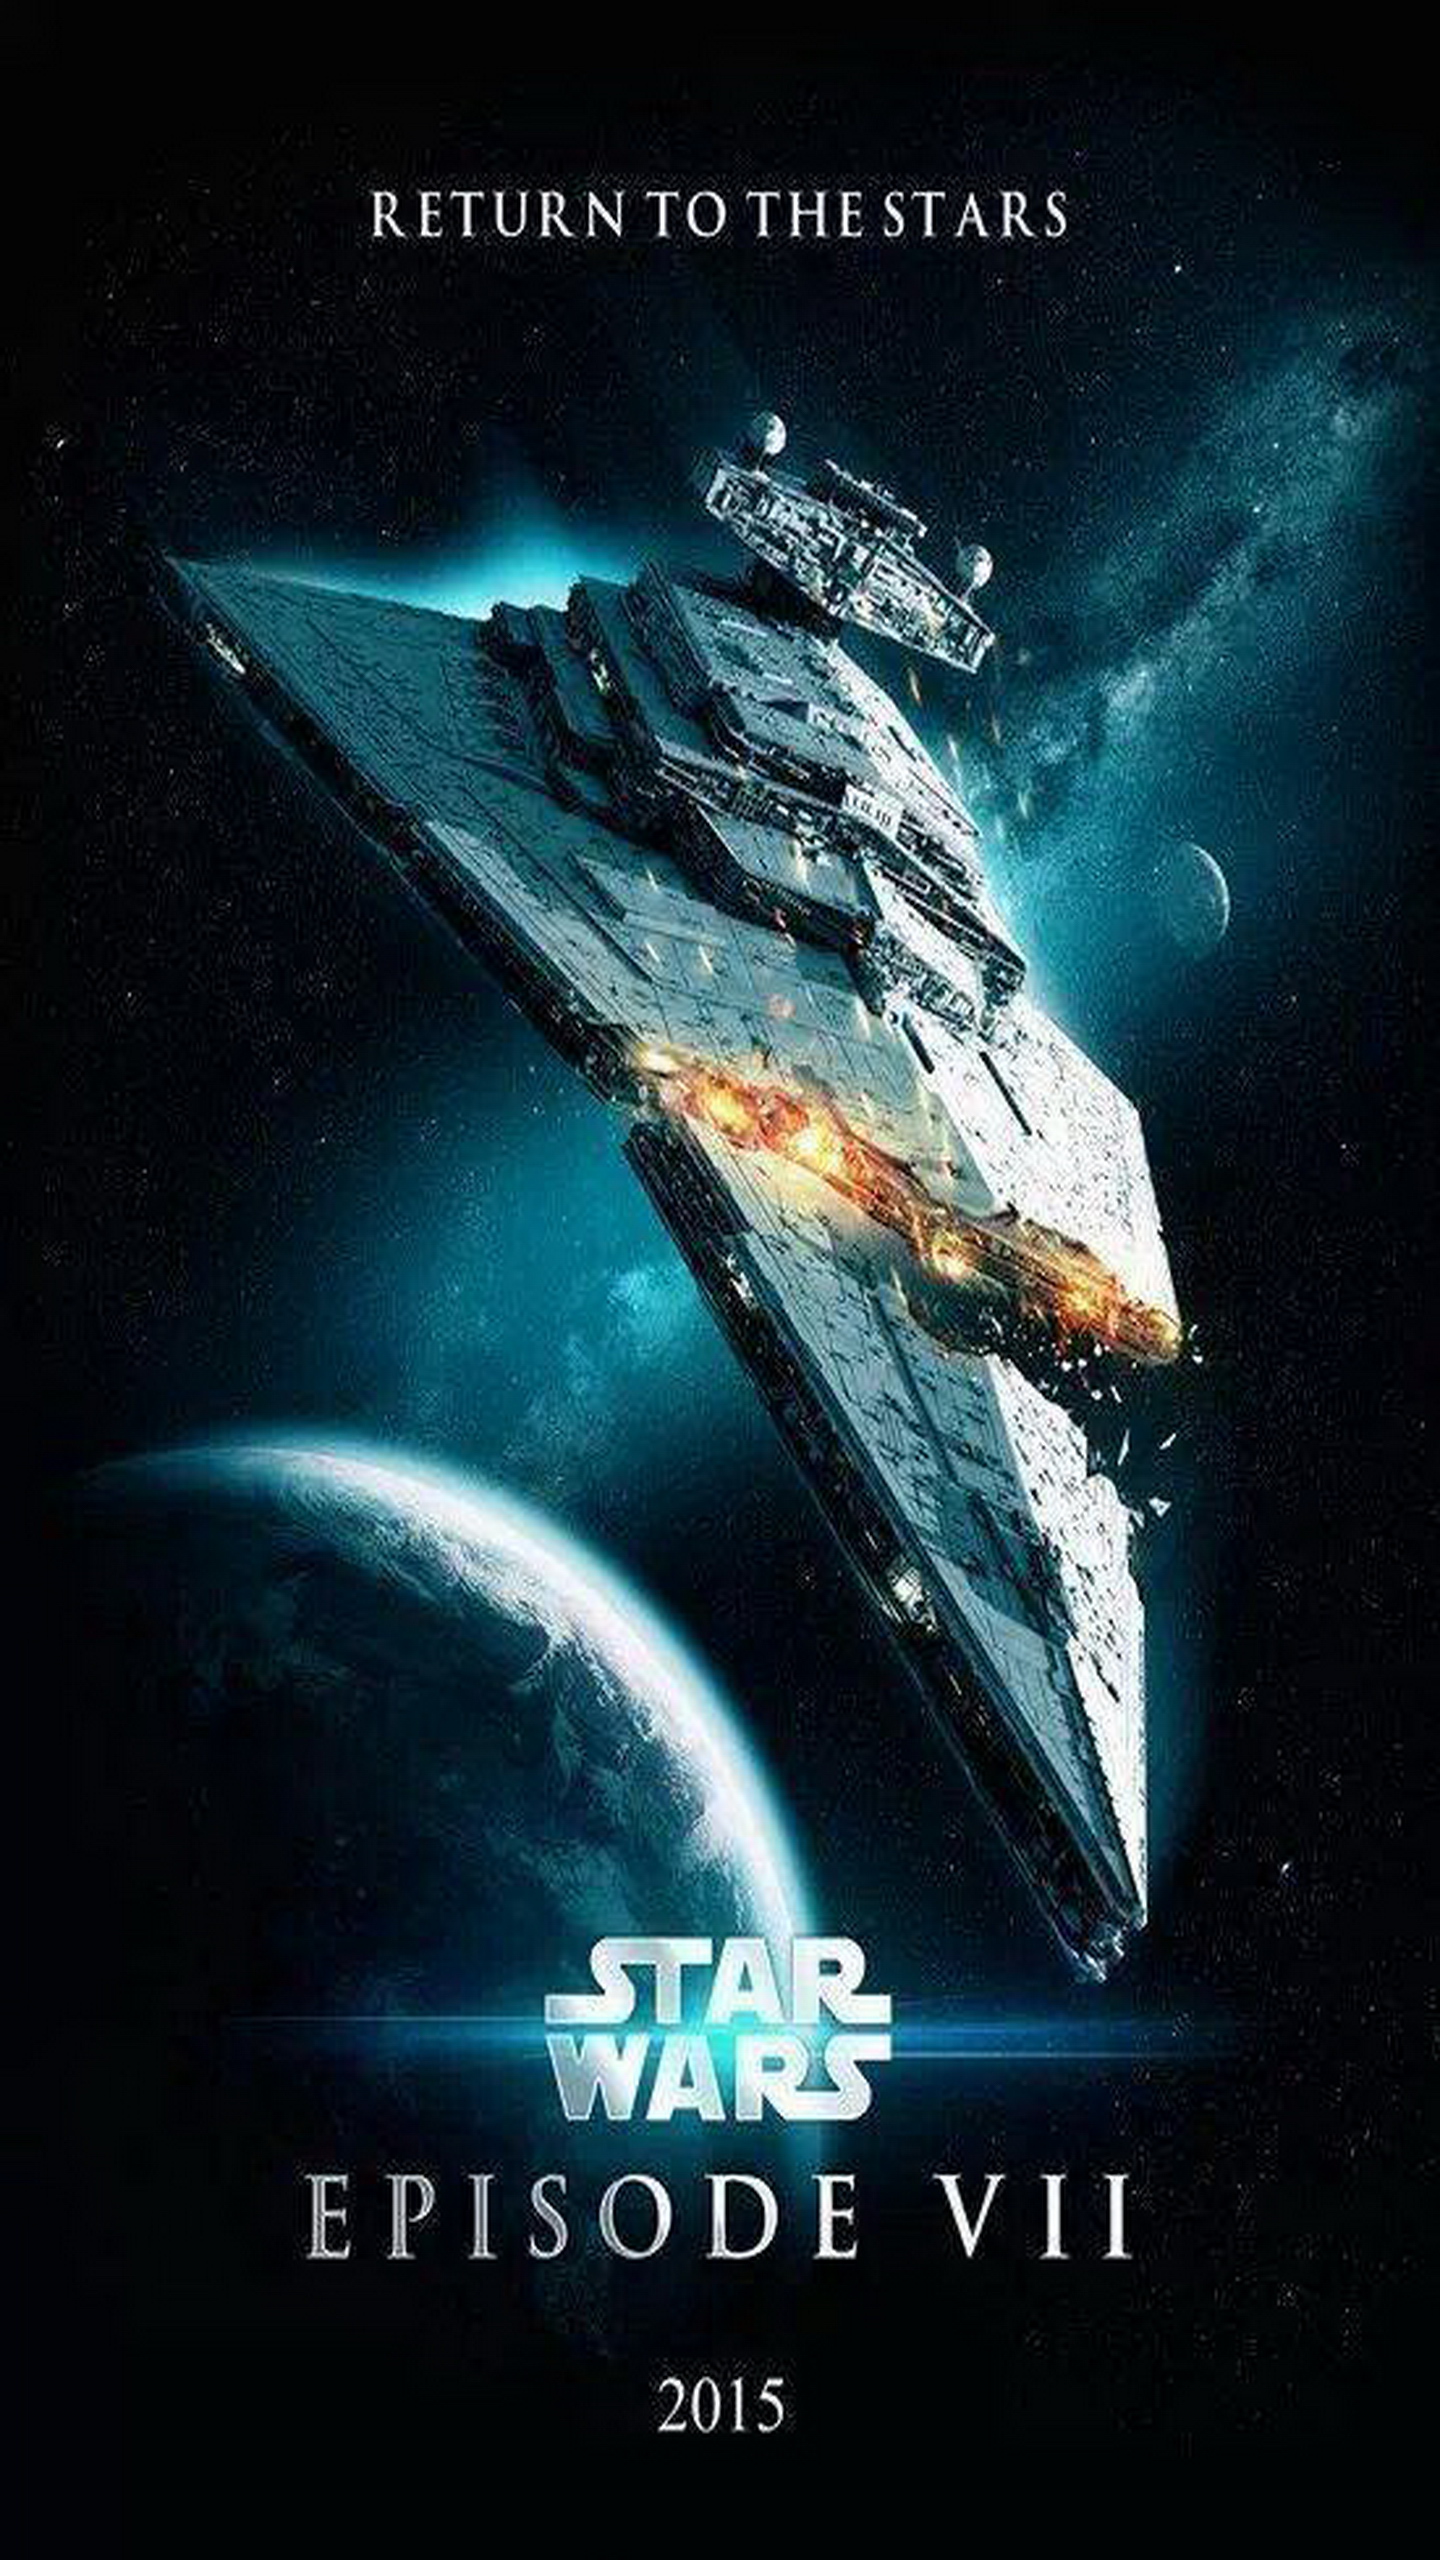 Star Wars Episode Vii The Force Awakens Poster Galaxy Note